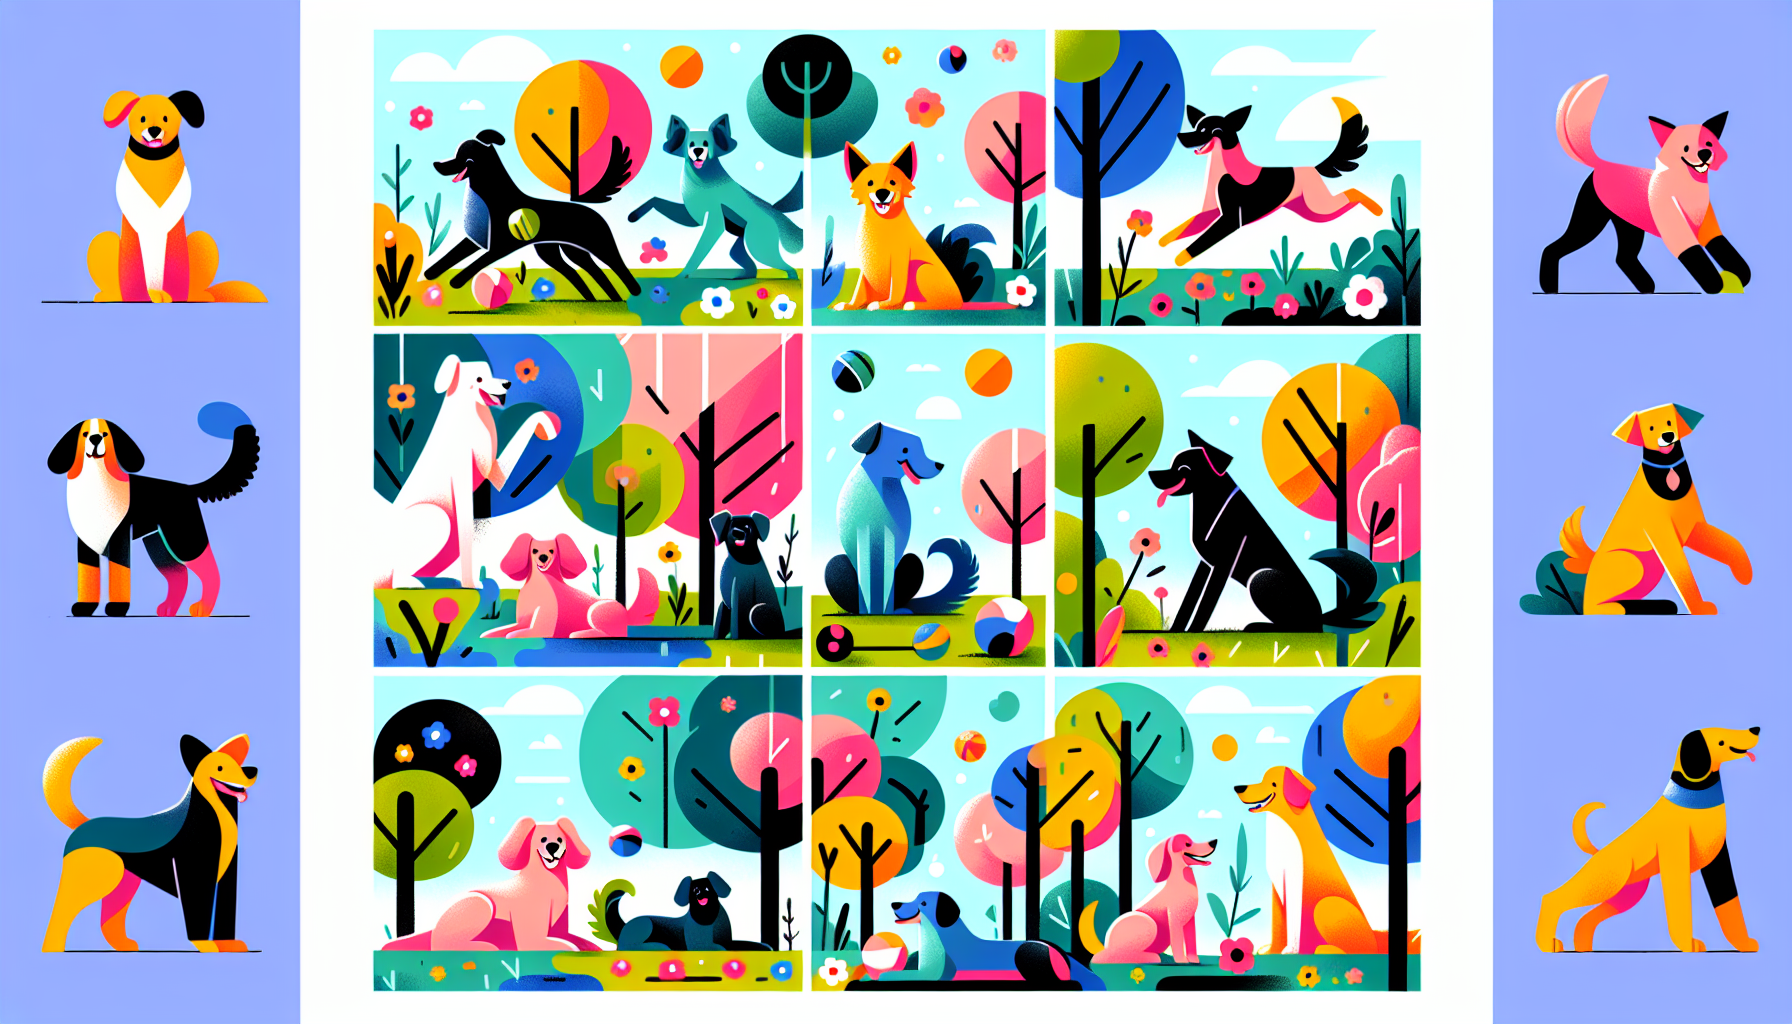 Colorful illustration of various breeds of joyful, playful dogs engaging in different fun activities in a sunny park setting.